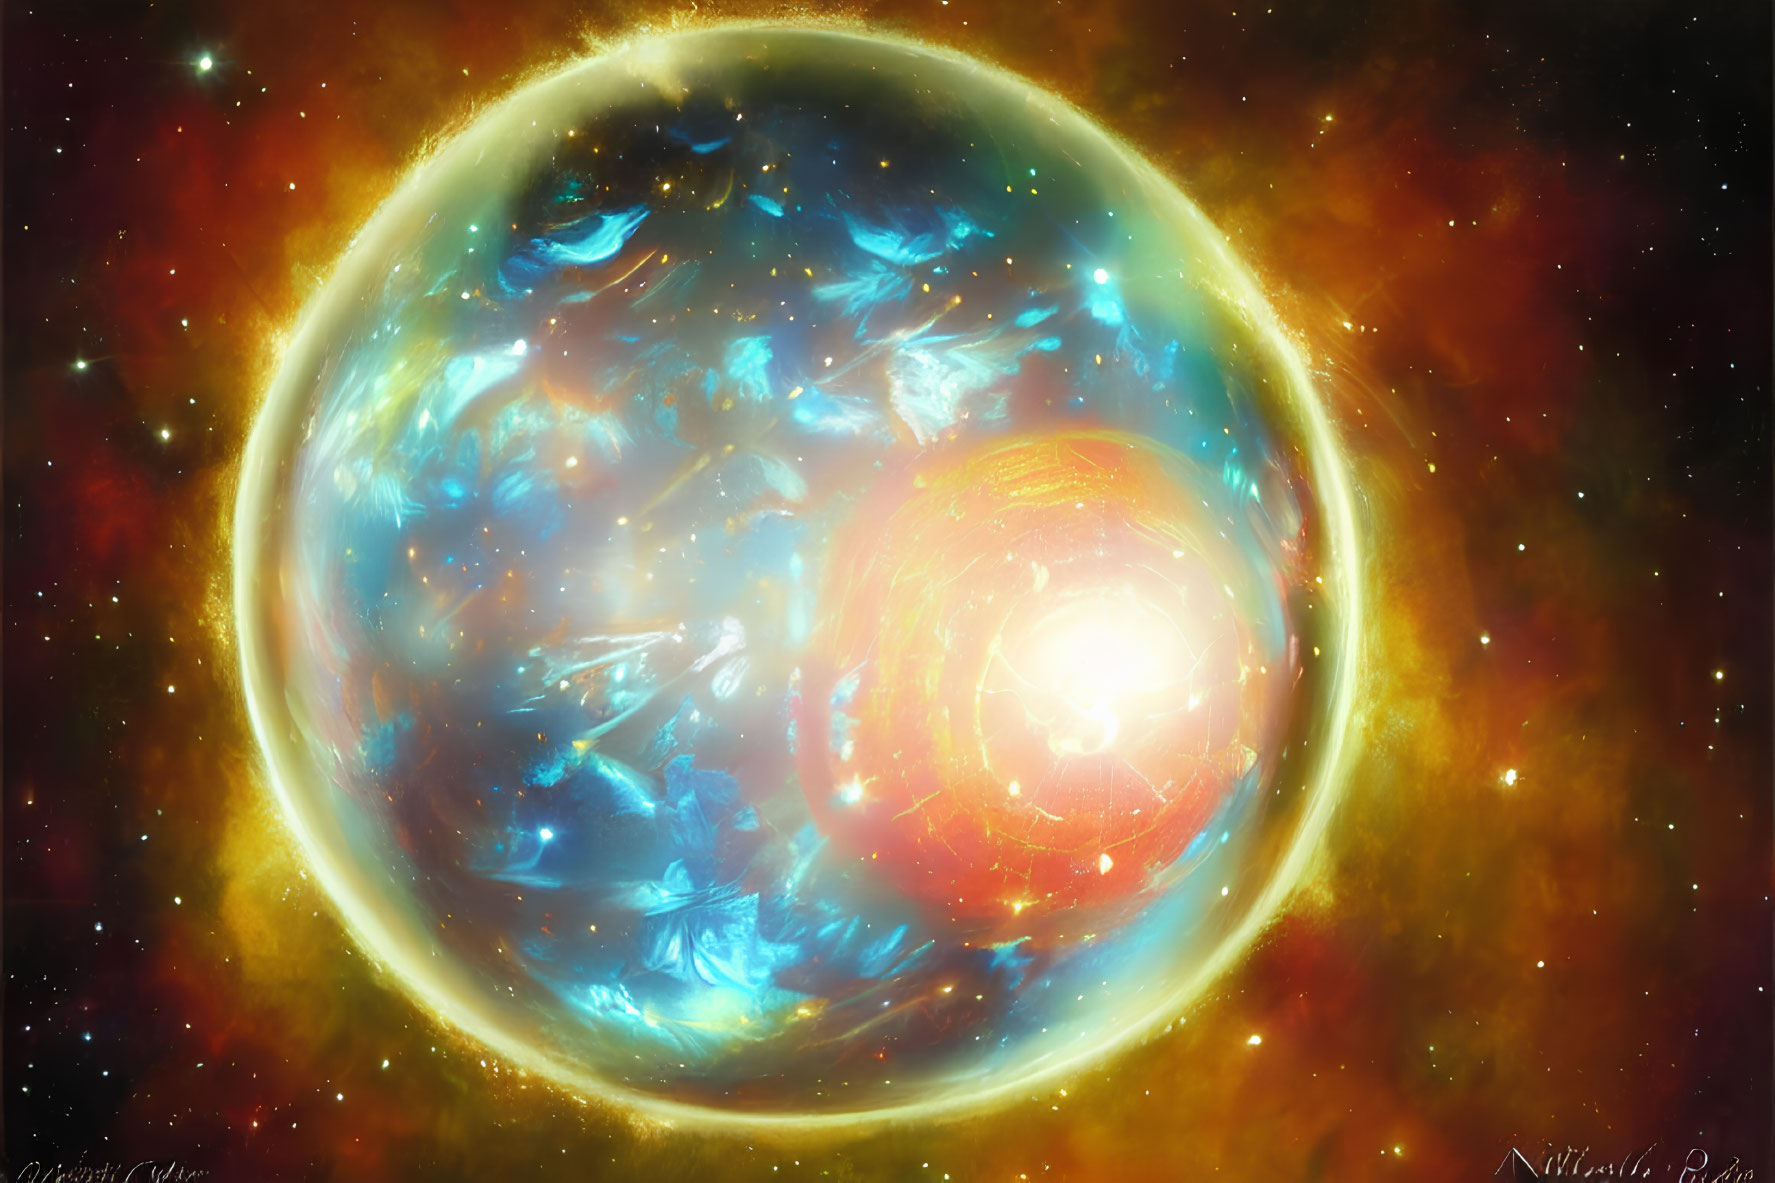 Celestial digital artwork with radiant sun-like sphere and cosmic colors